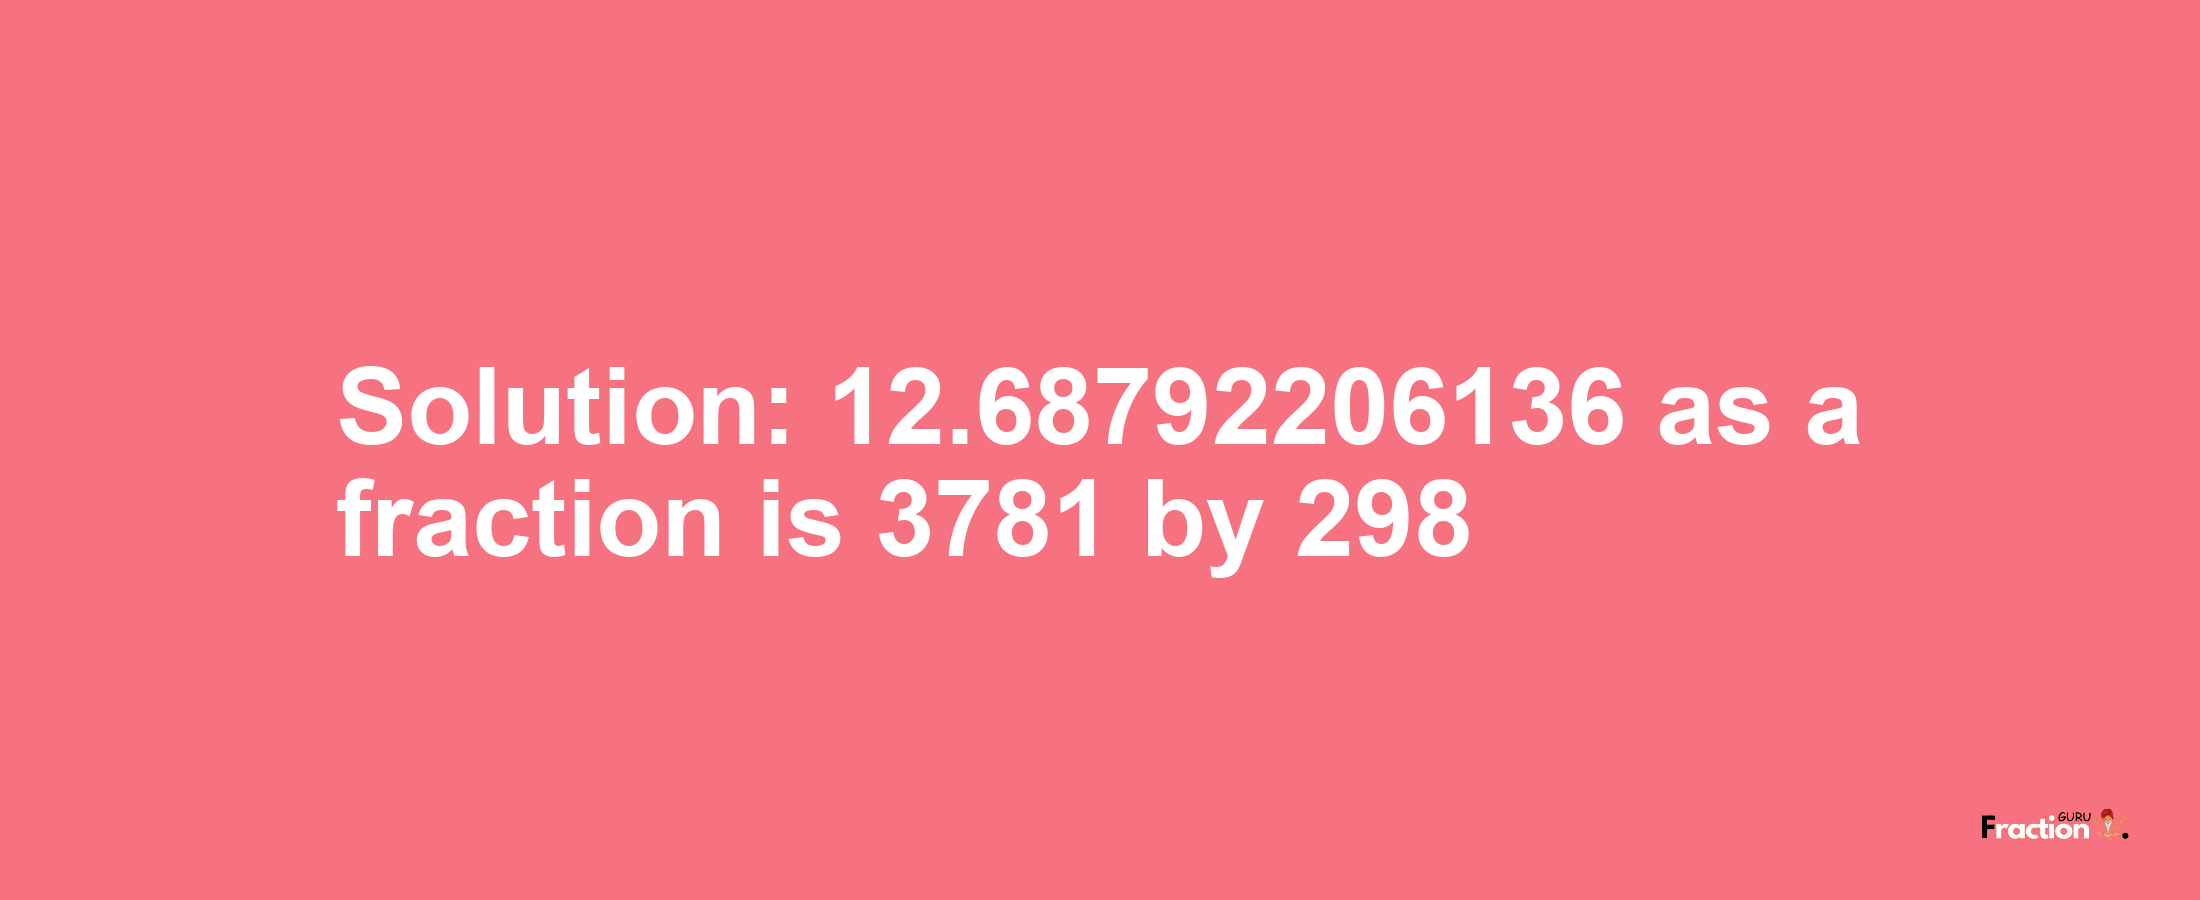 Solution:12.68792206136 as a fraction is 3781/298